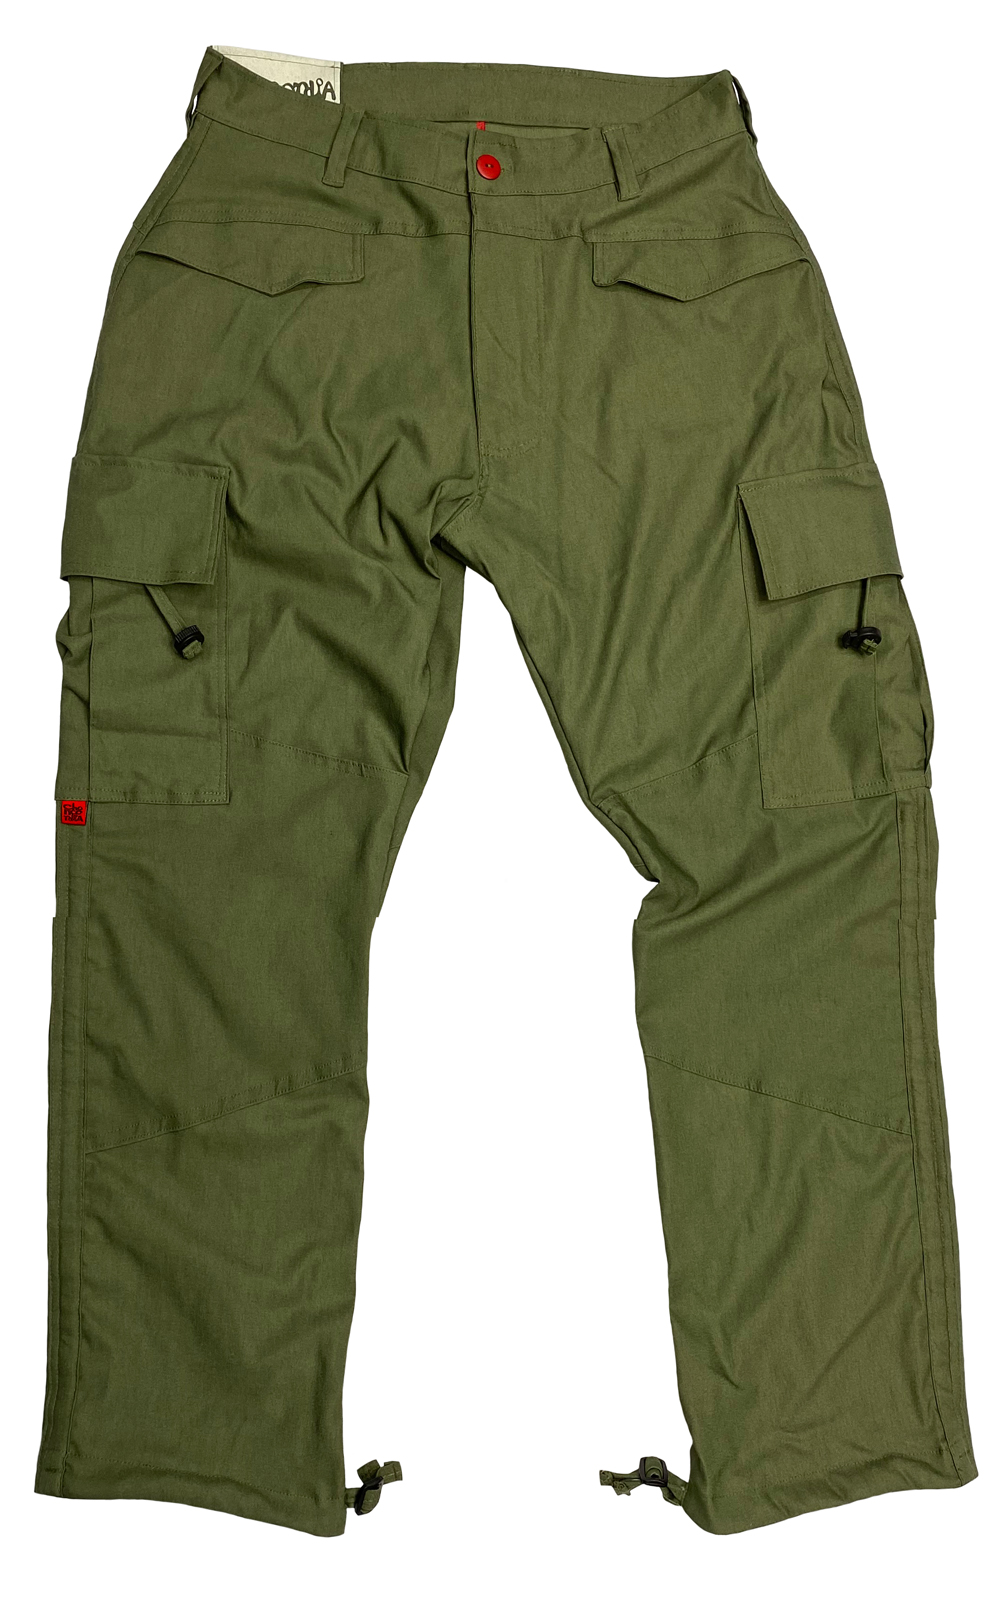 Buy LA Police Gear Men's Water Resistant Operator Tactical Cargo Pants with  Lower Leg Pockets - OD Green - 28 x 30 at Amazon.in